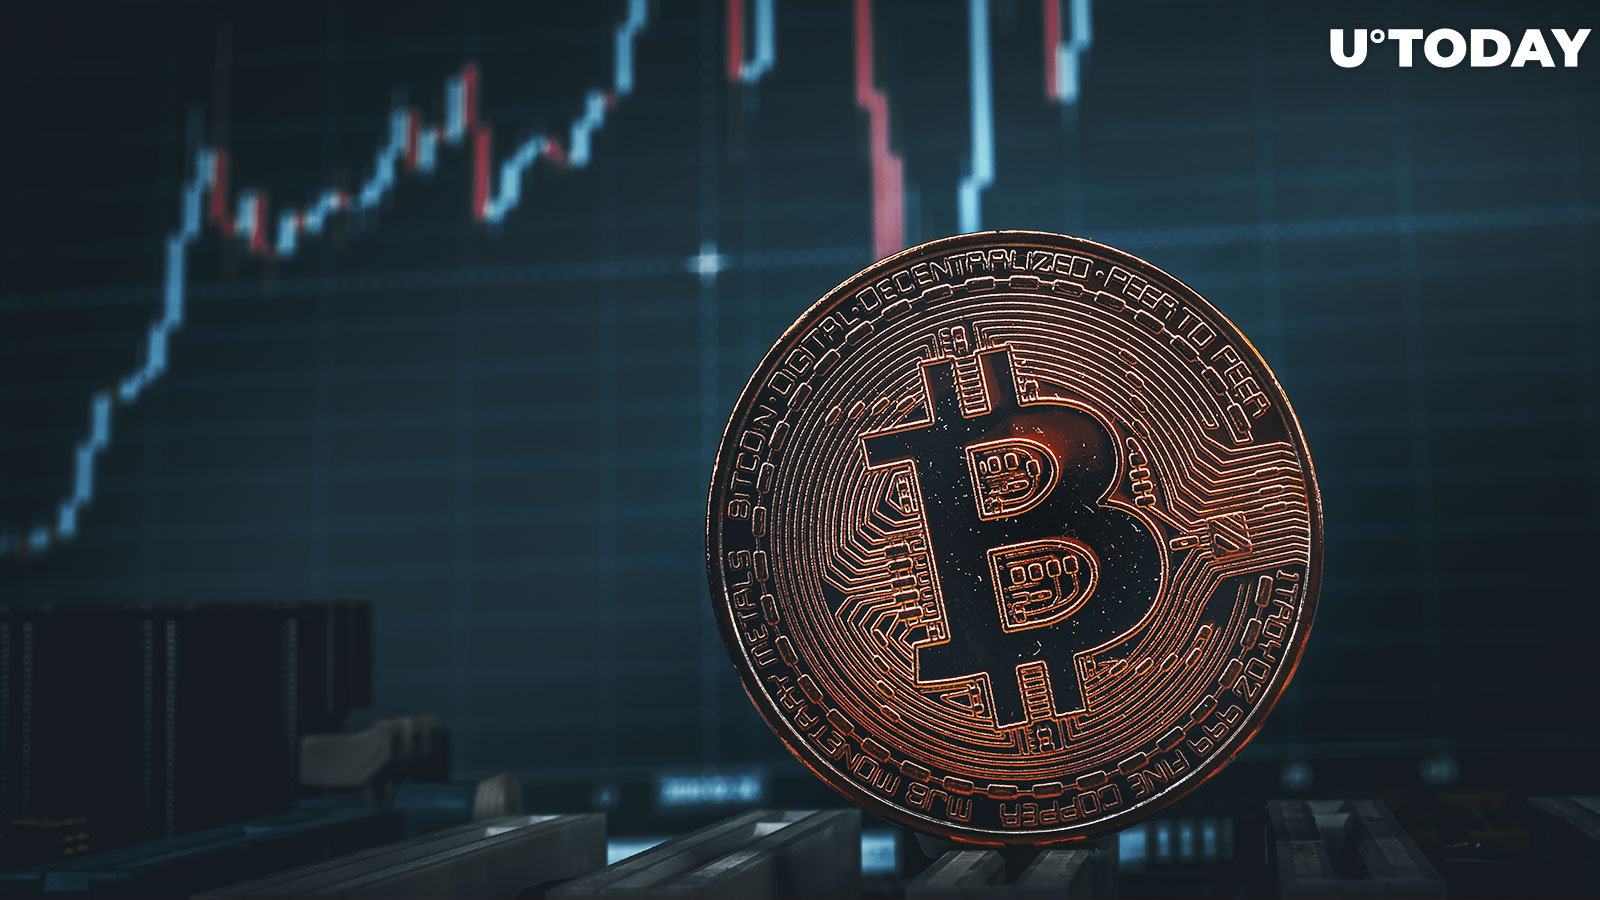 Bitcoin (BTC) Rally Cools, Here's Top Reason Why